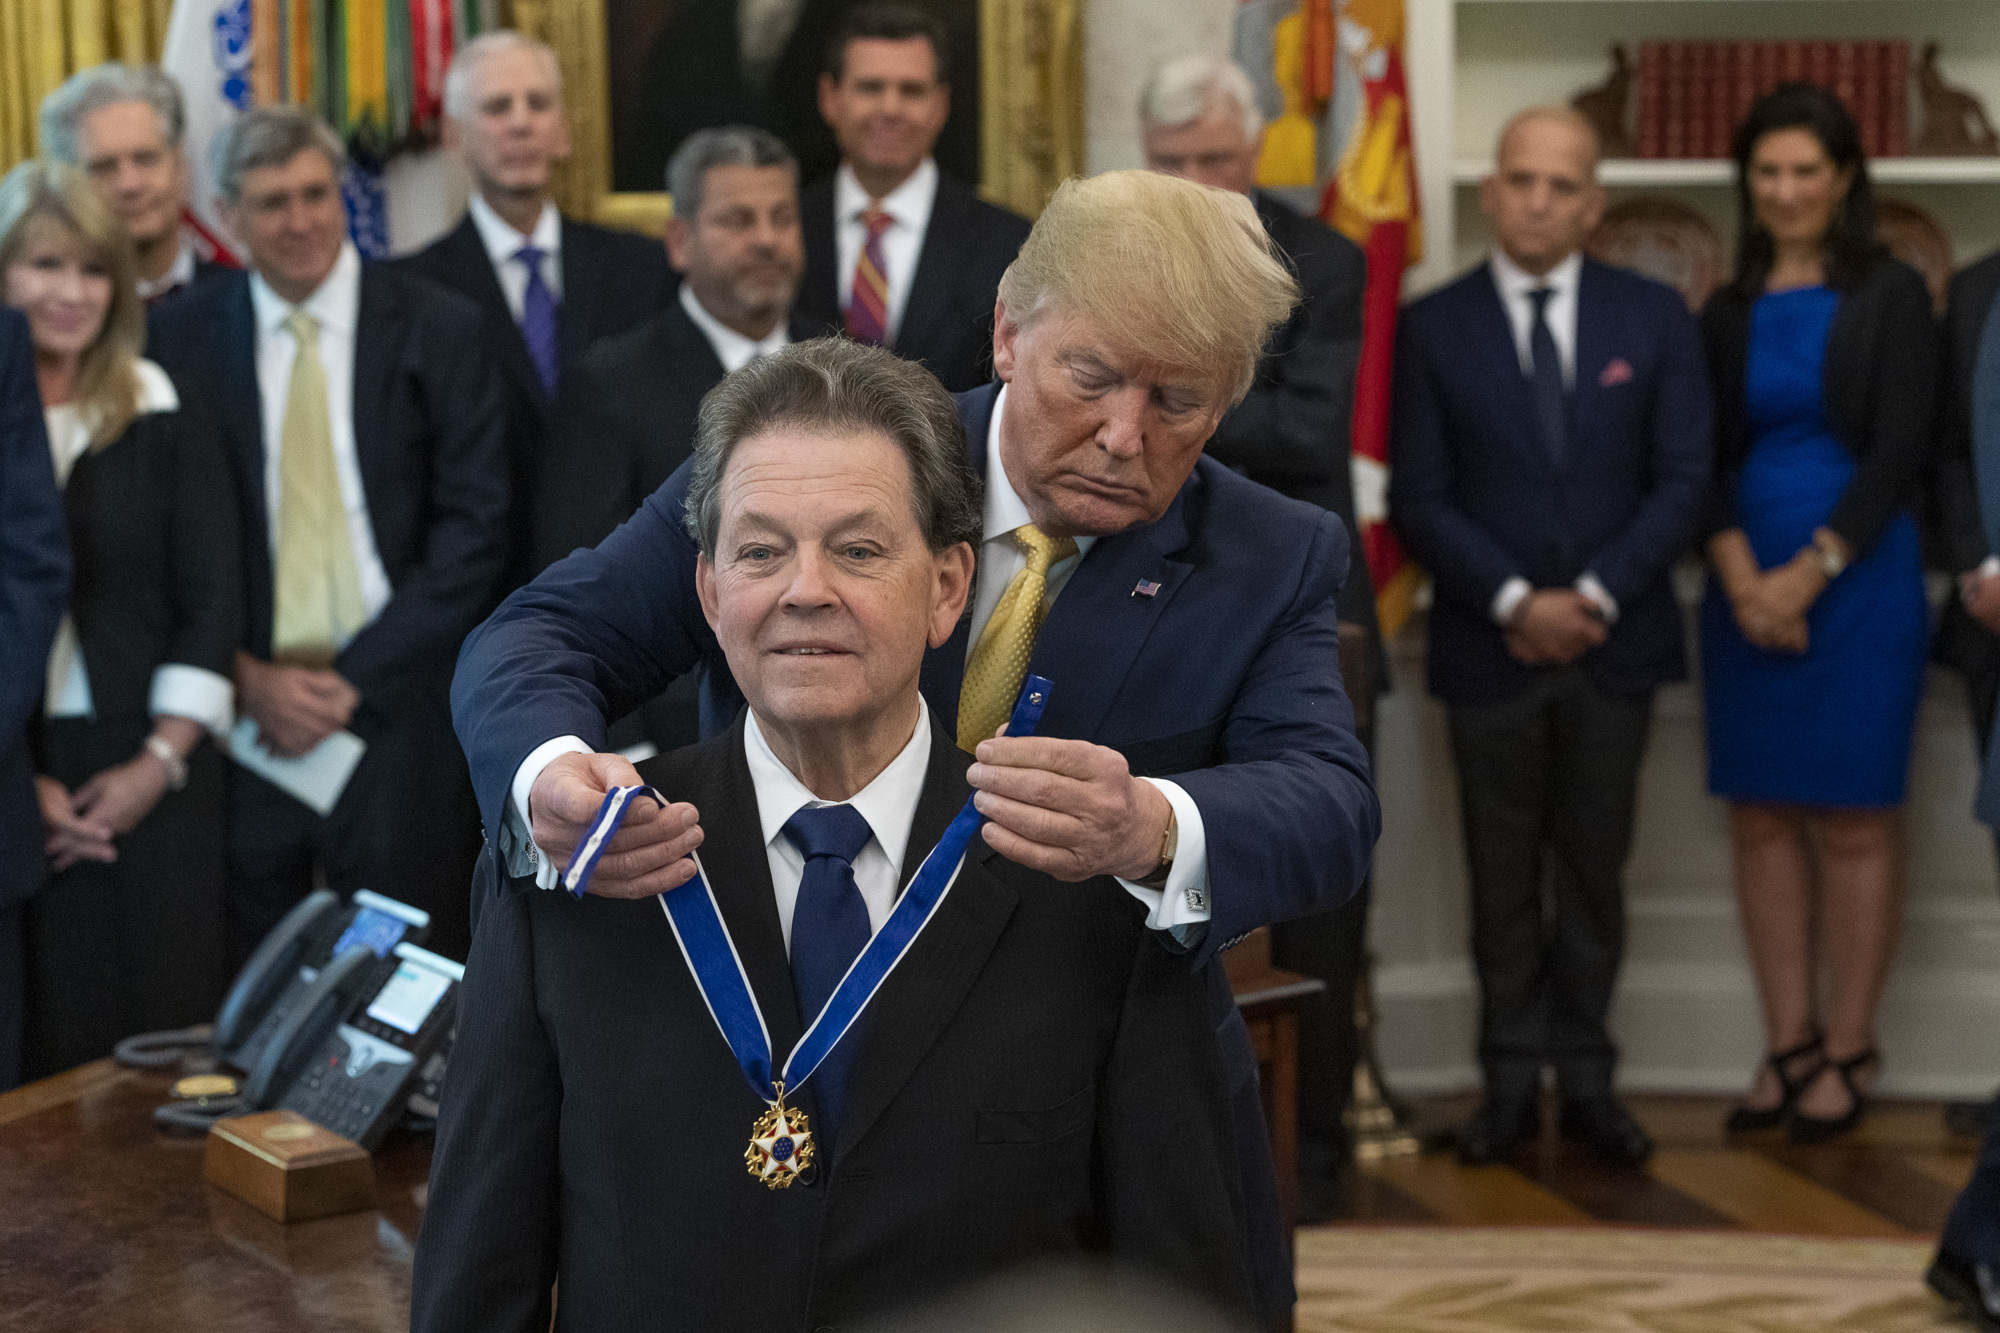 Economist Arthur Laffer, a member of the Gee Group board of directors, is awarded the Presidential Medal of Freedom by President Trump.